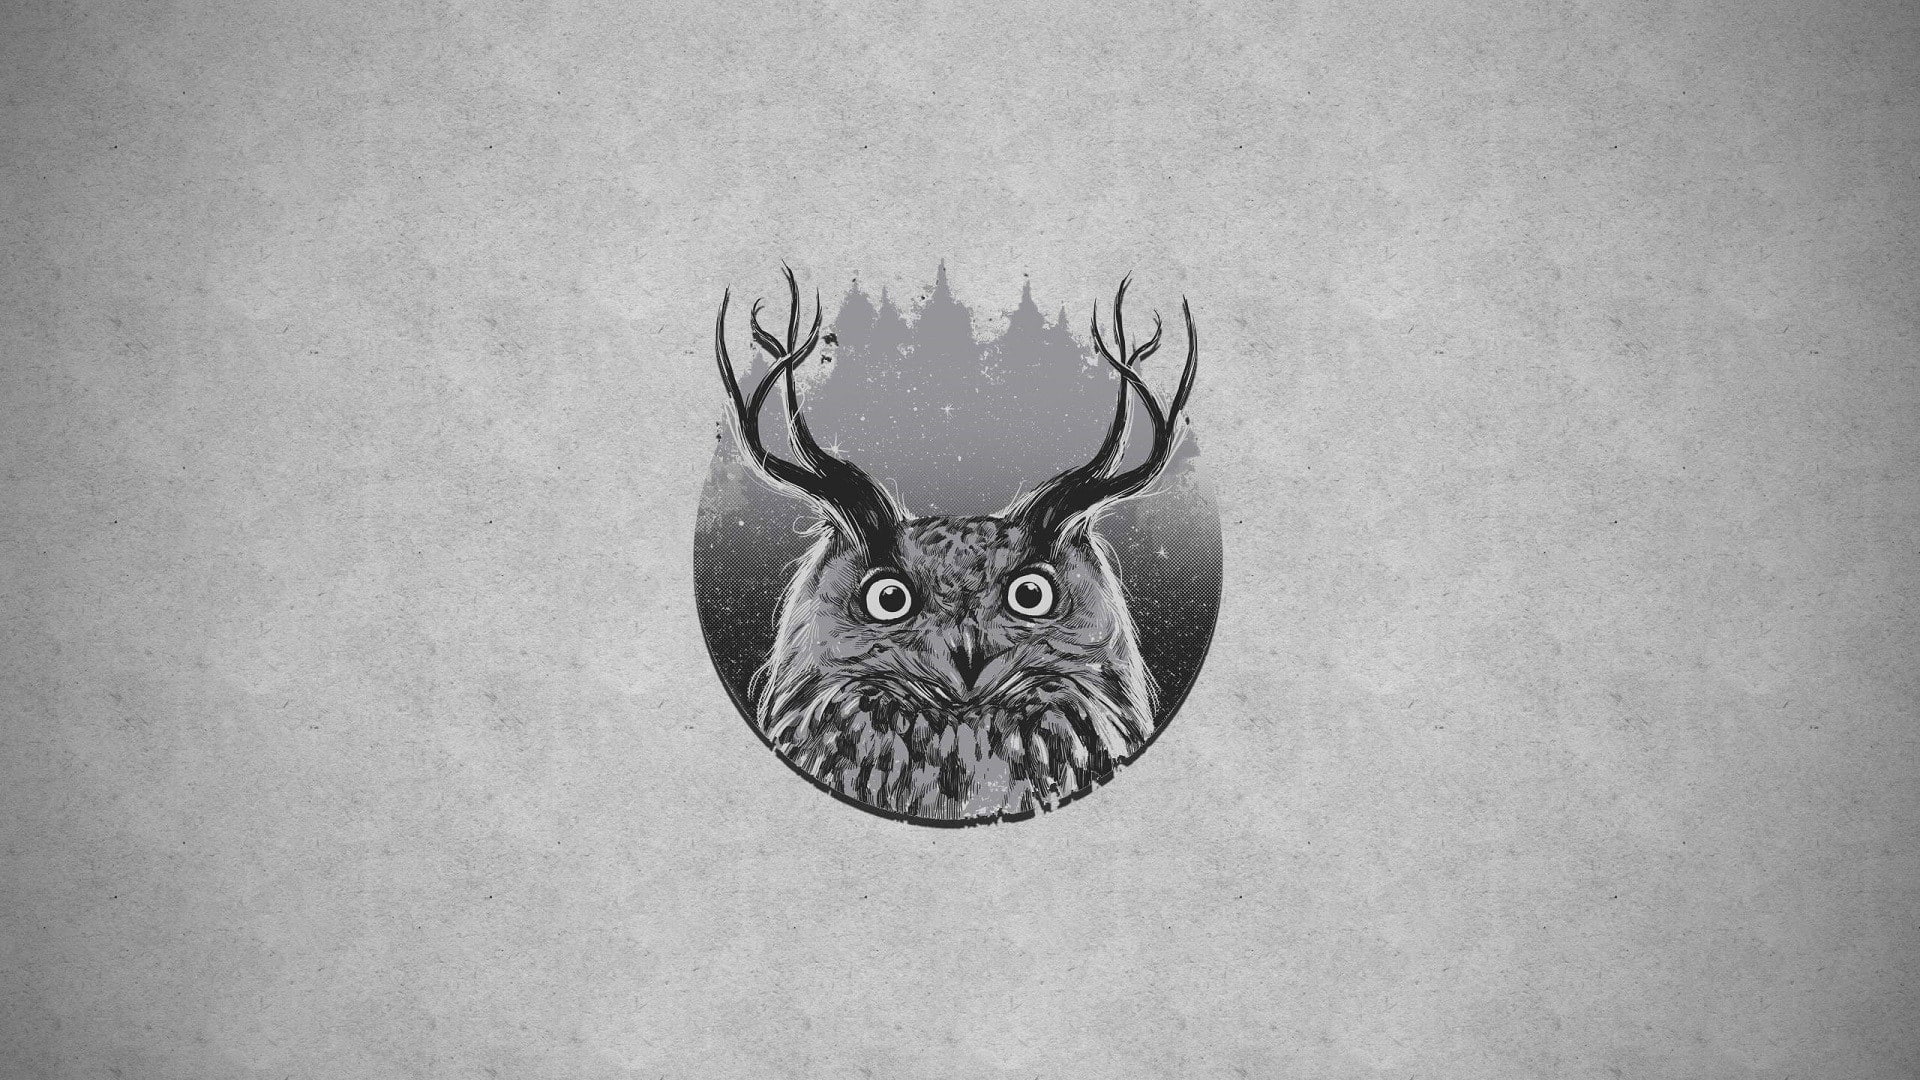 owl, forest